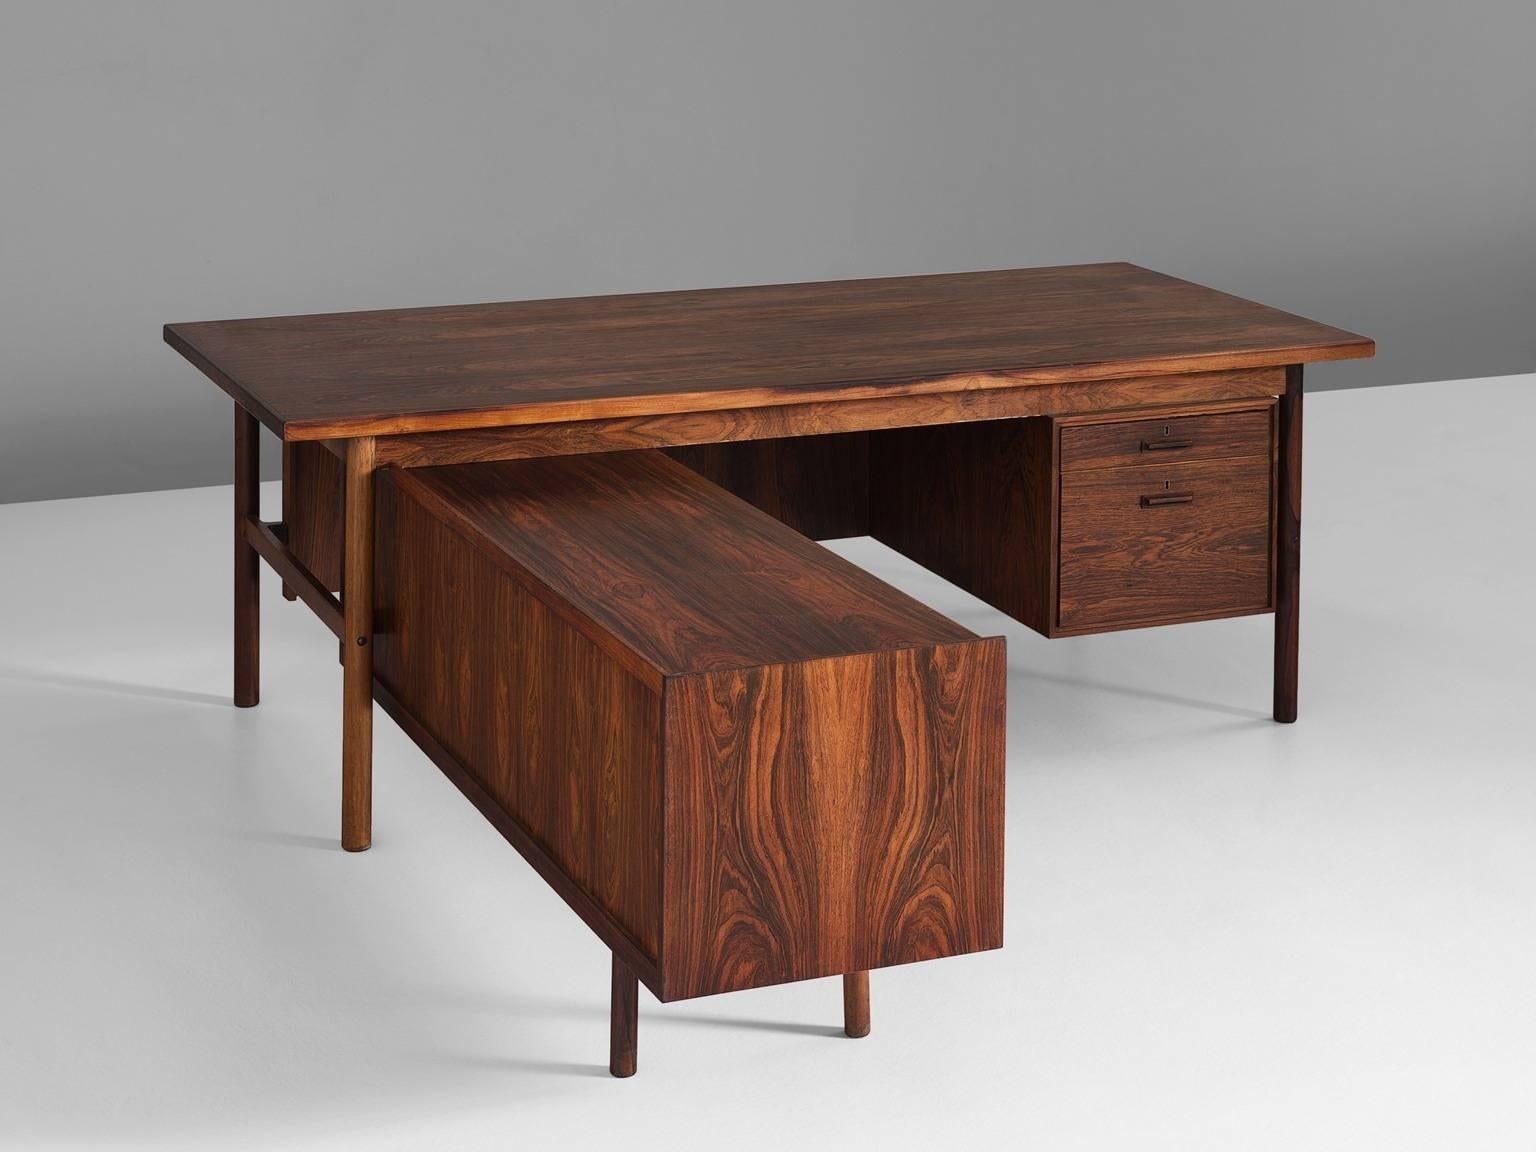 Ib Kofod-Larsen for Brande Møbelfabrik, executive desk, rosewood, Denmark, 1960s. 
 
The L-shaped desk consists of a higher and lower part with several drawers and shelves. The desk shows some nice crafted details. The return is situated on the